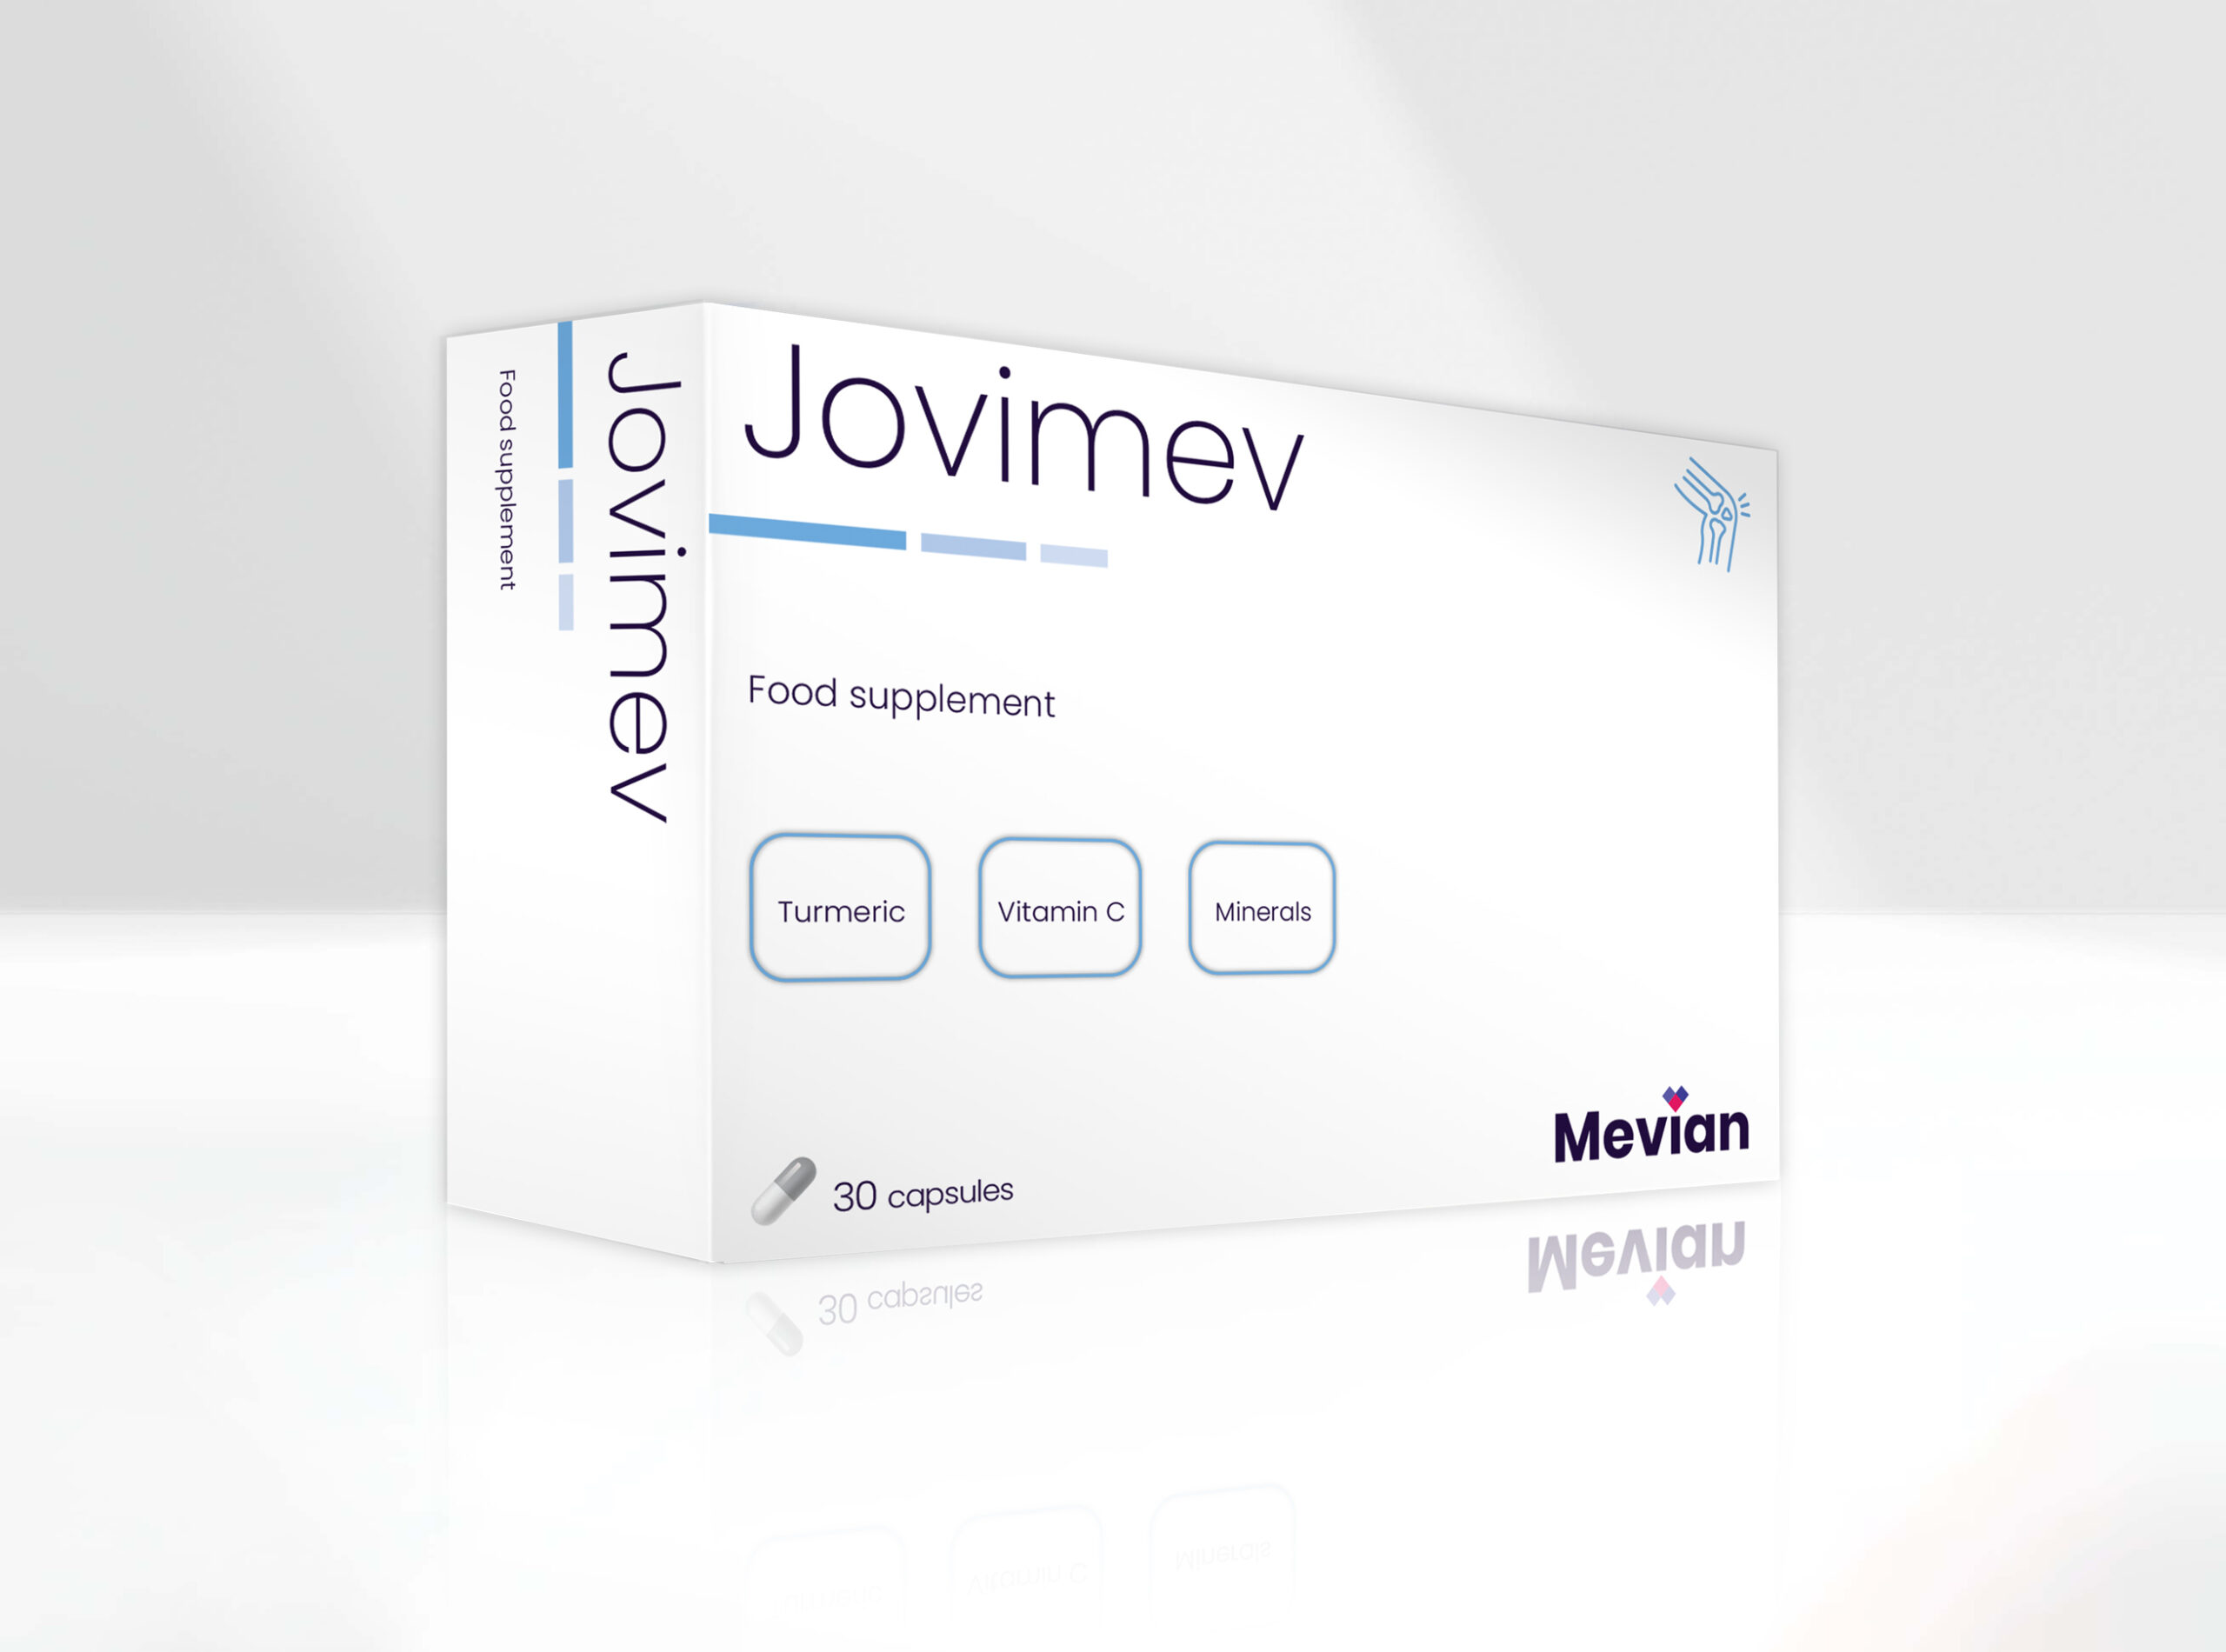 Jovimev is an ideal supplement containing proprietary ingredients with clinical evidence demonstrating remarkable efficacy in reducing chronic and acute joint pain.